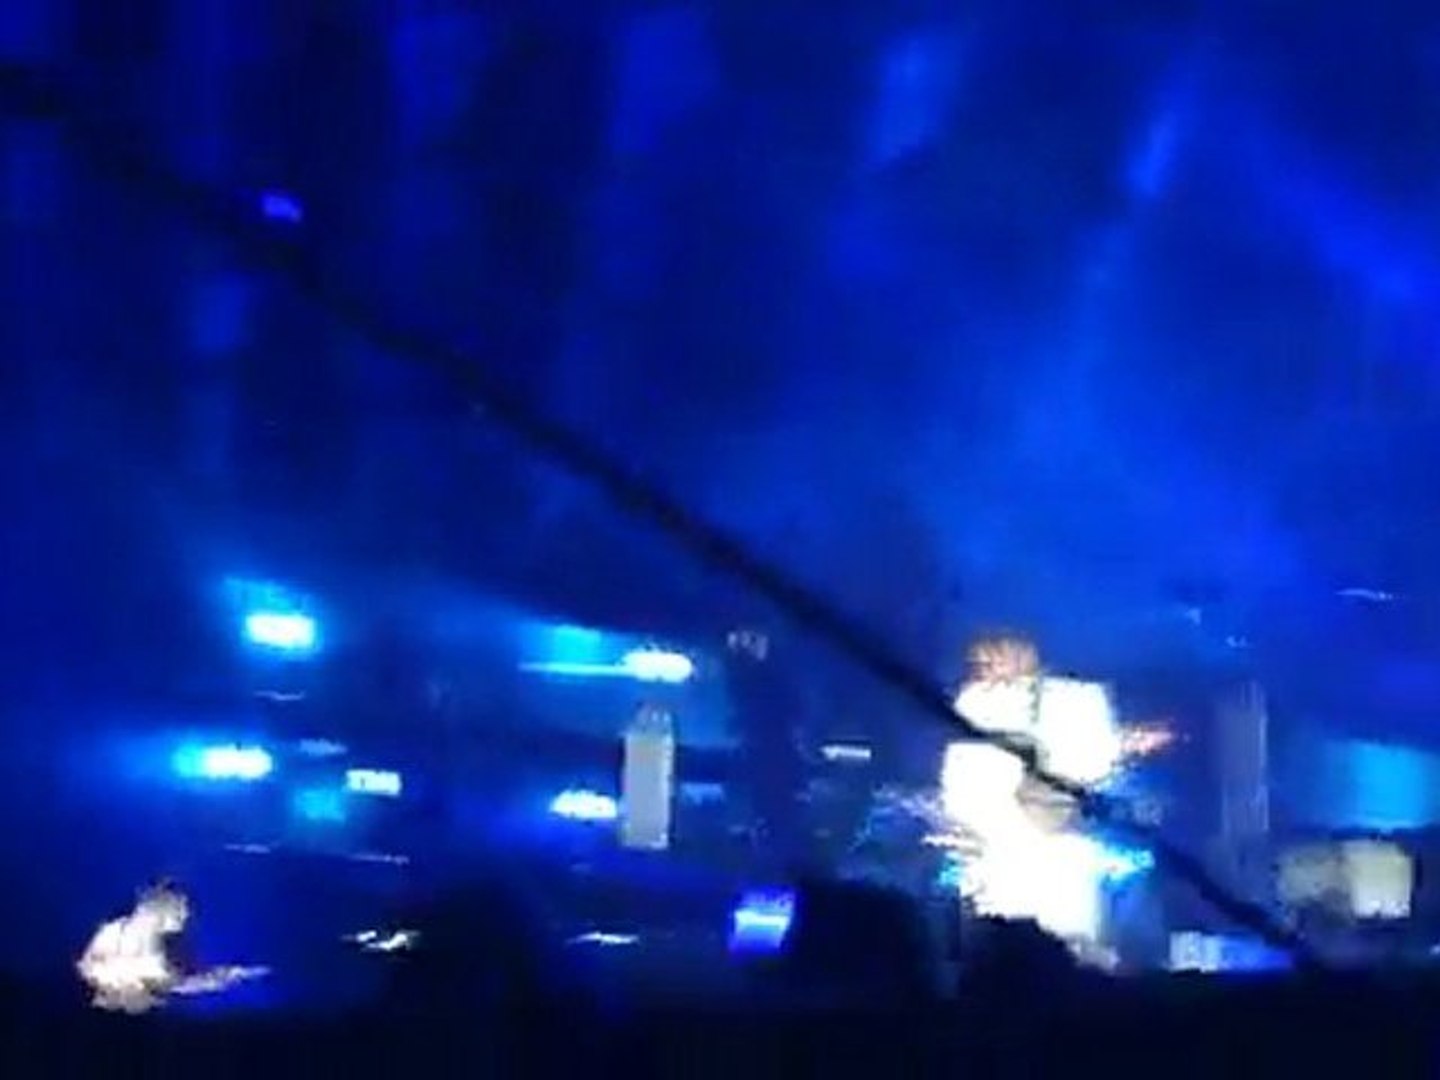 Muse - Man with a harmonica + Knights of Cydonia (live) - Vidéo Dailymotion